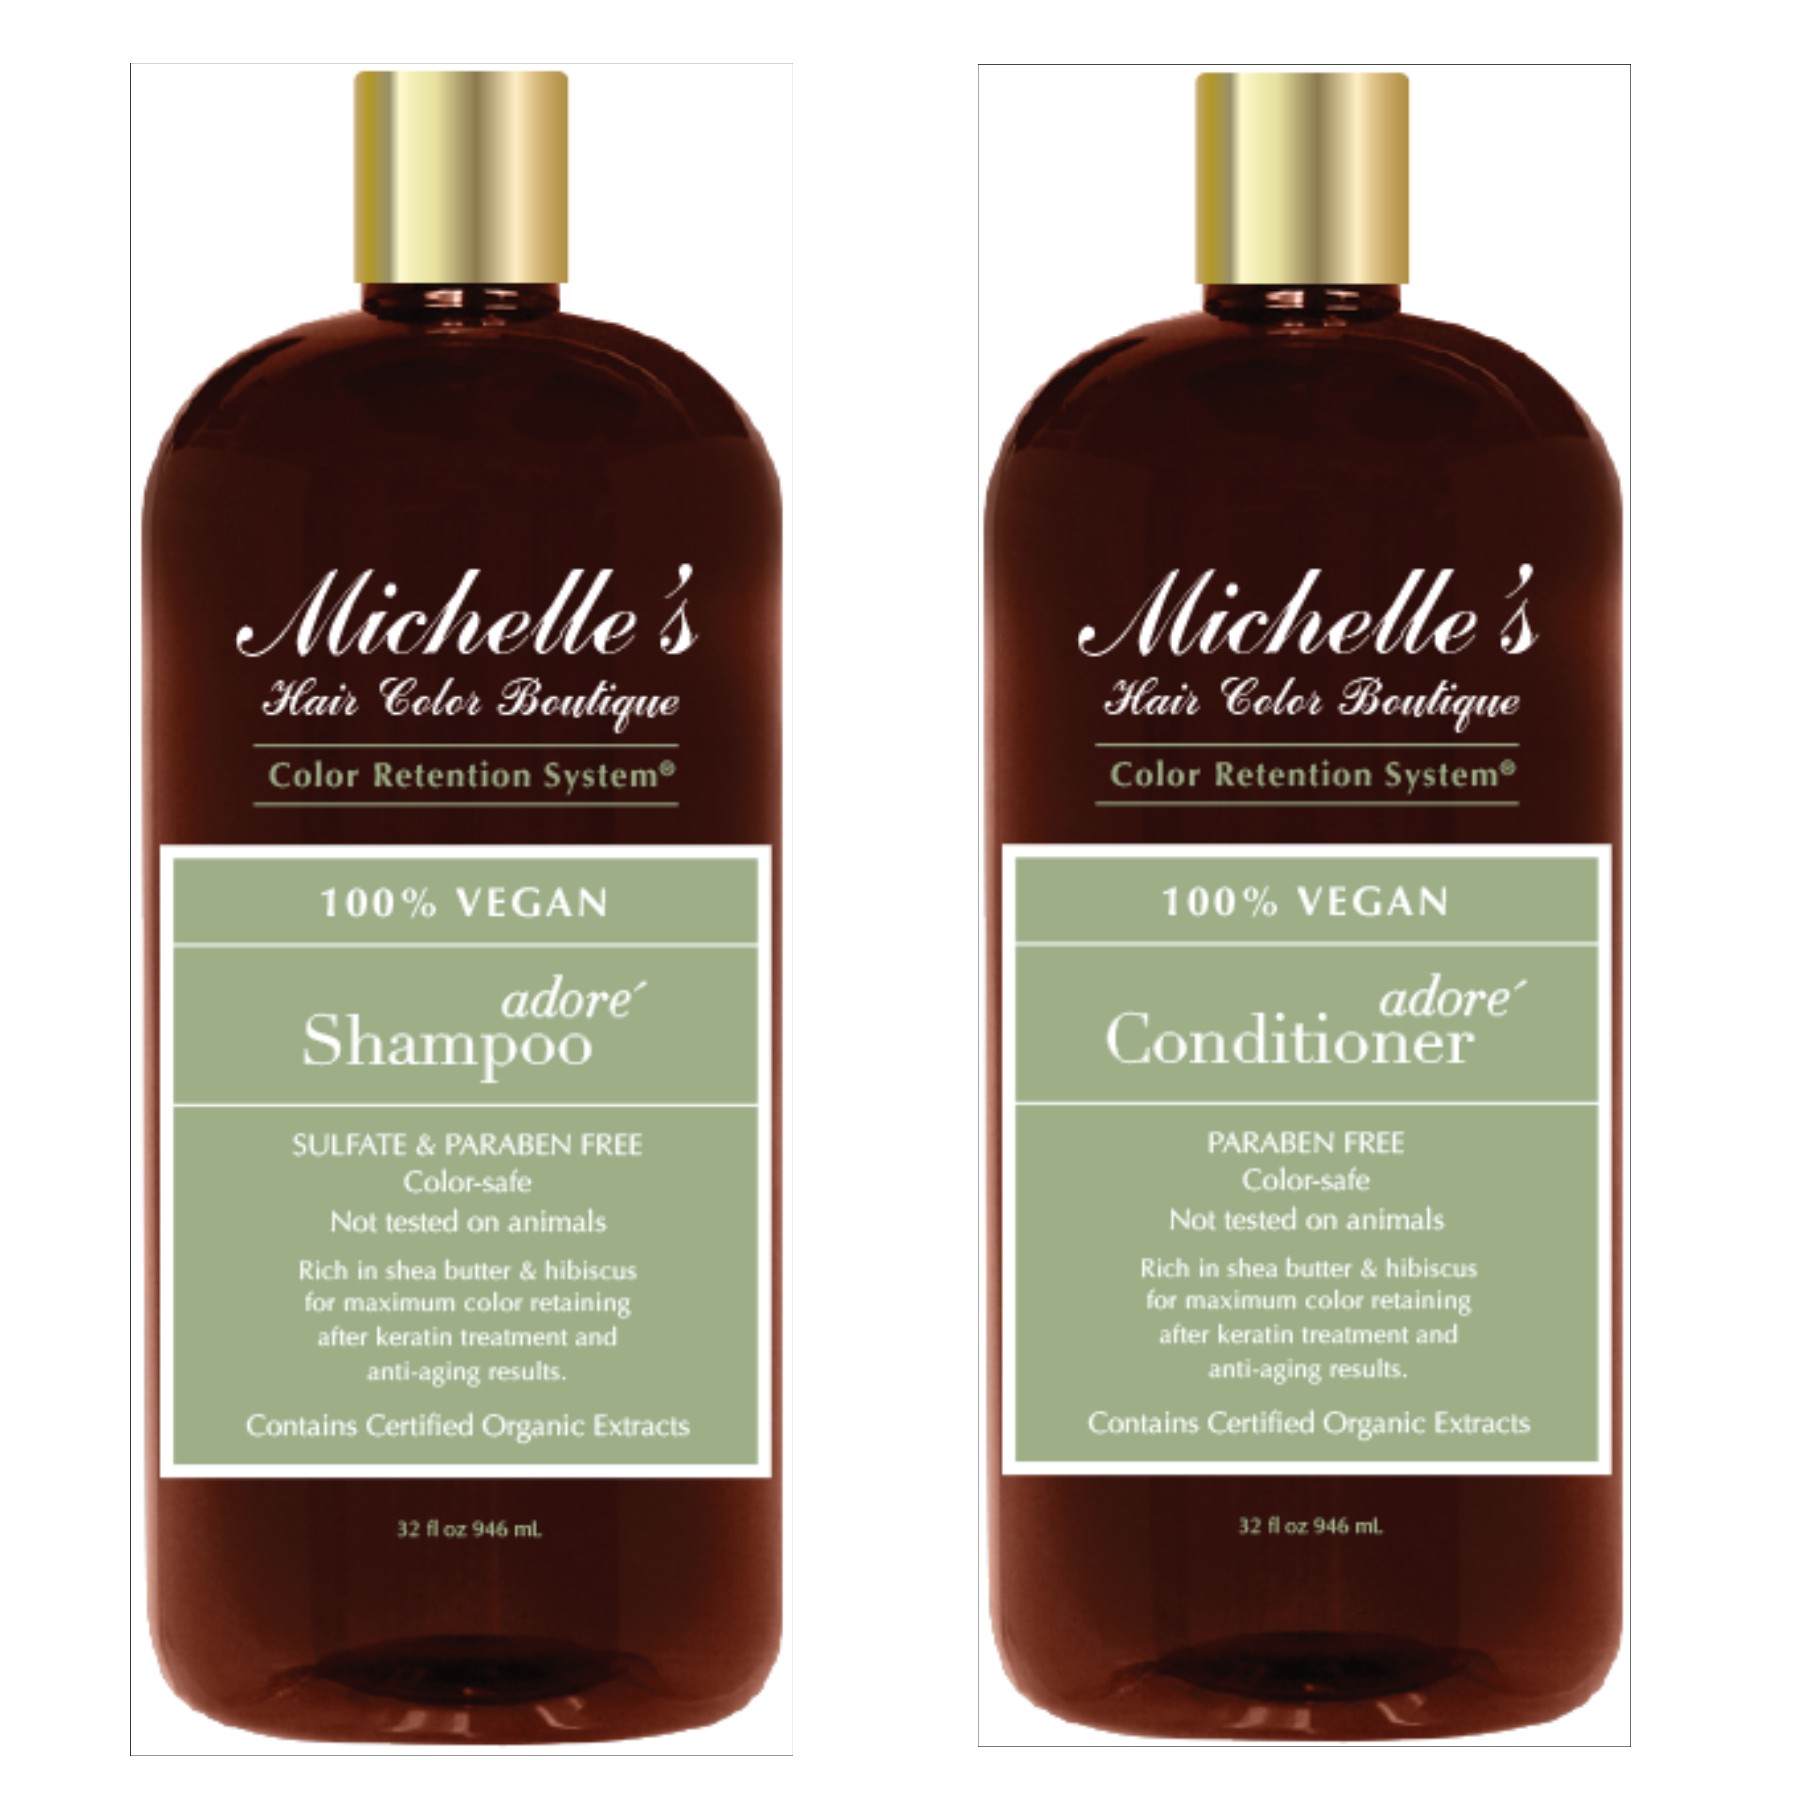 Michelles products